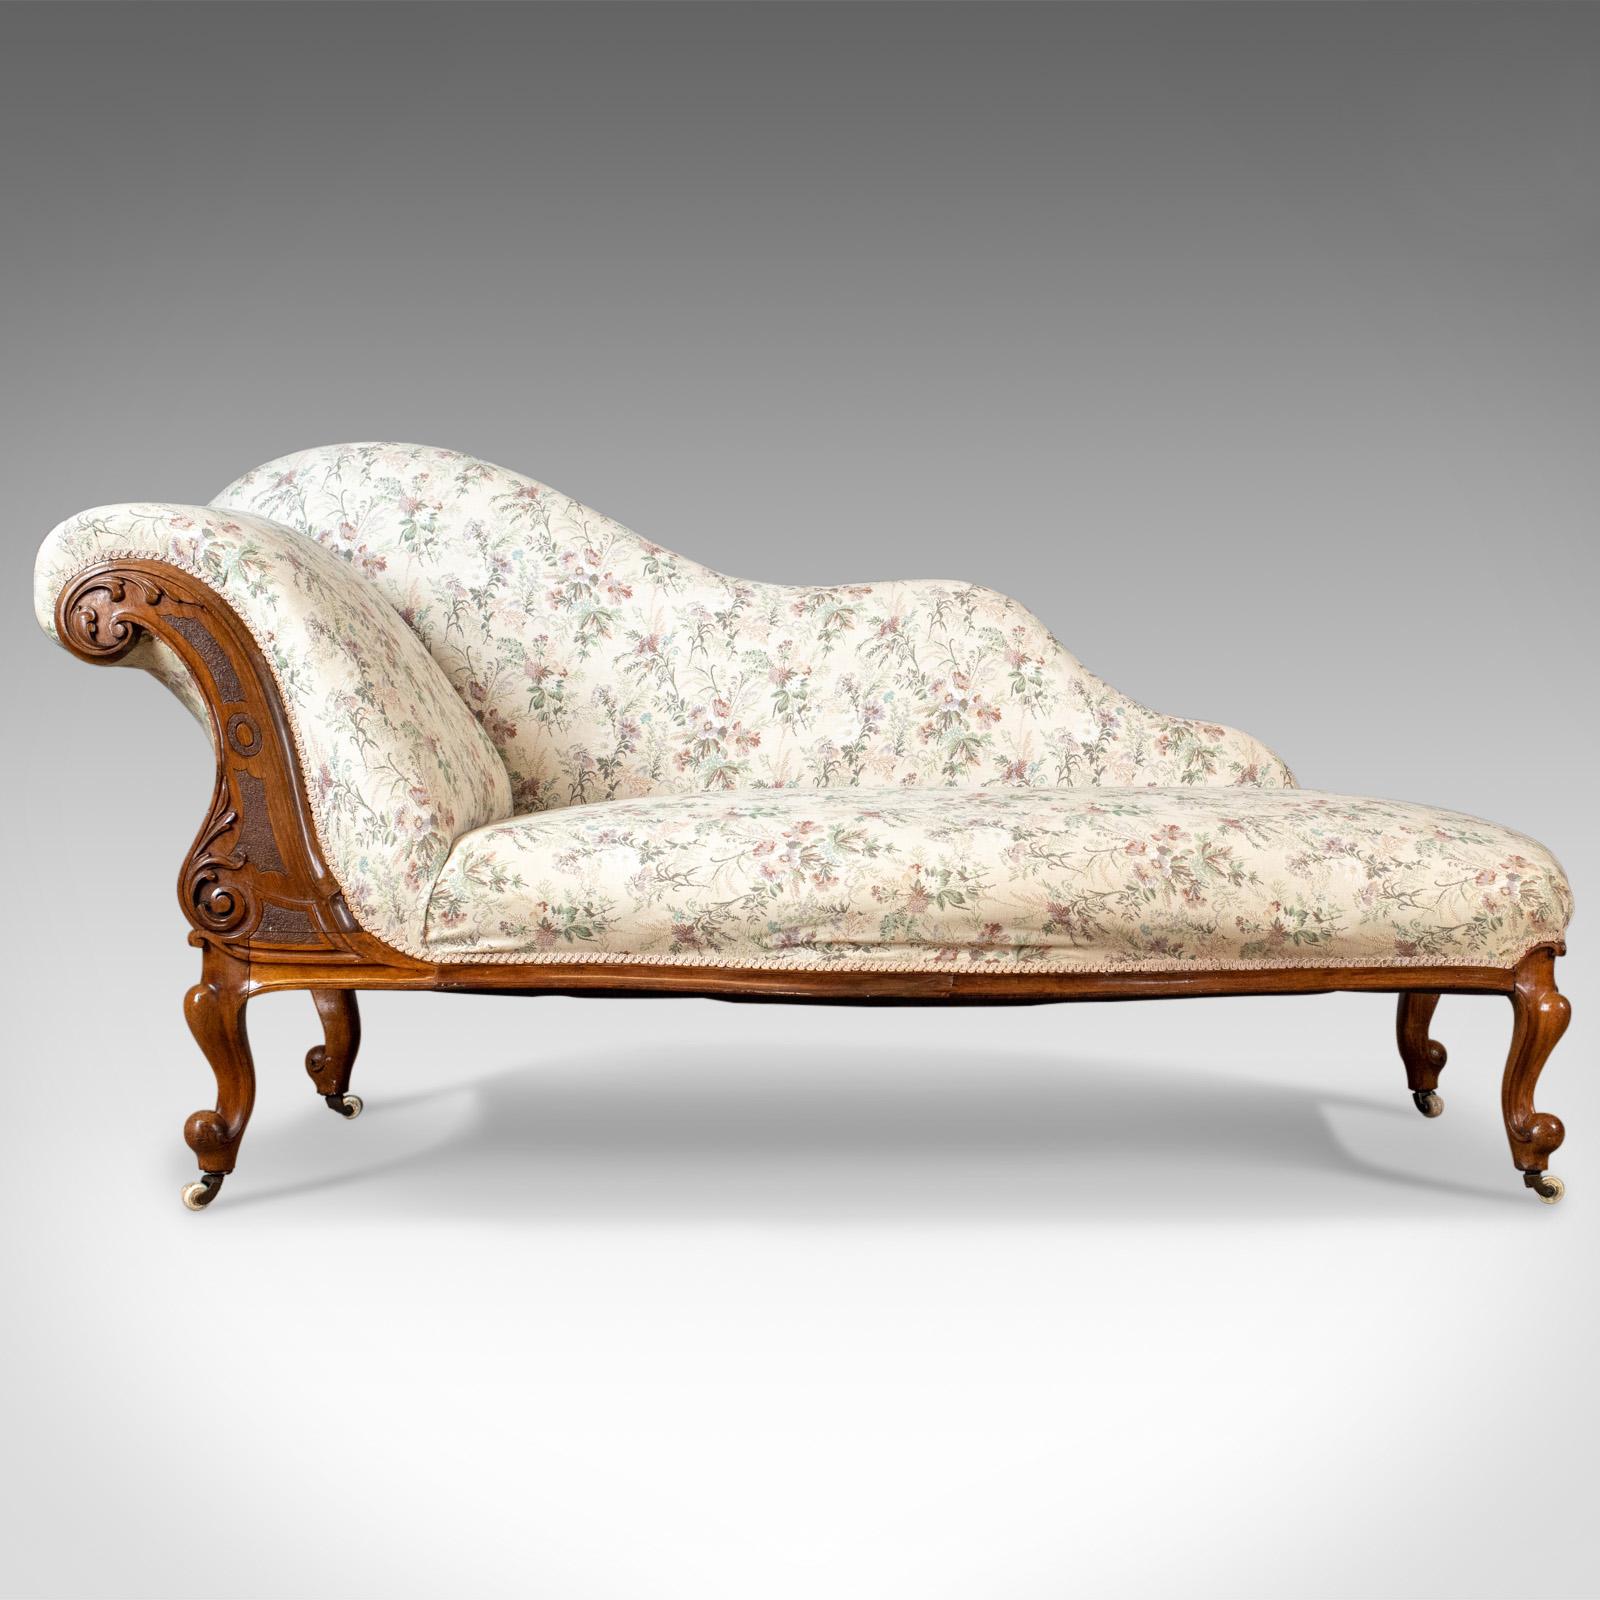 This is a left-handed antique chaise longue, an English, late Regency day bed on walnut frame dating to circa 1830.

Raised on walnut, cabriole legs with bump knee and toe
Riding upon the original ceramic castors
Appealing sinuous form,